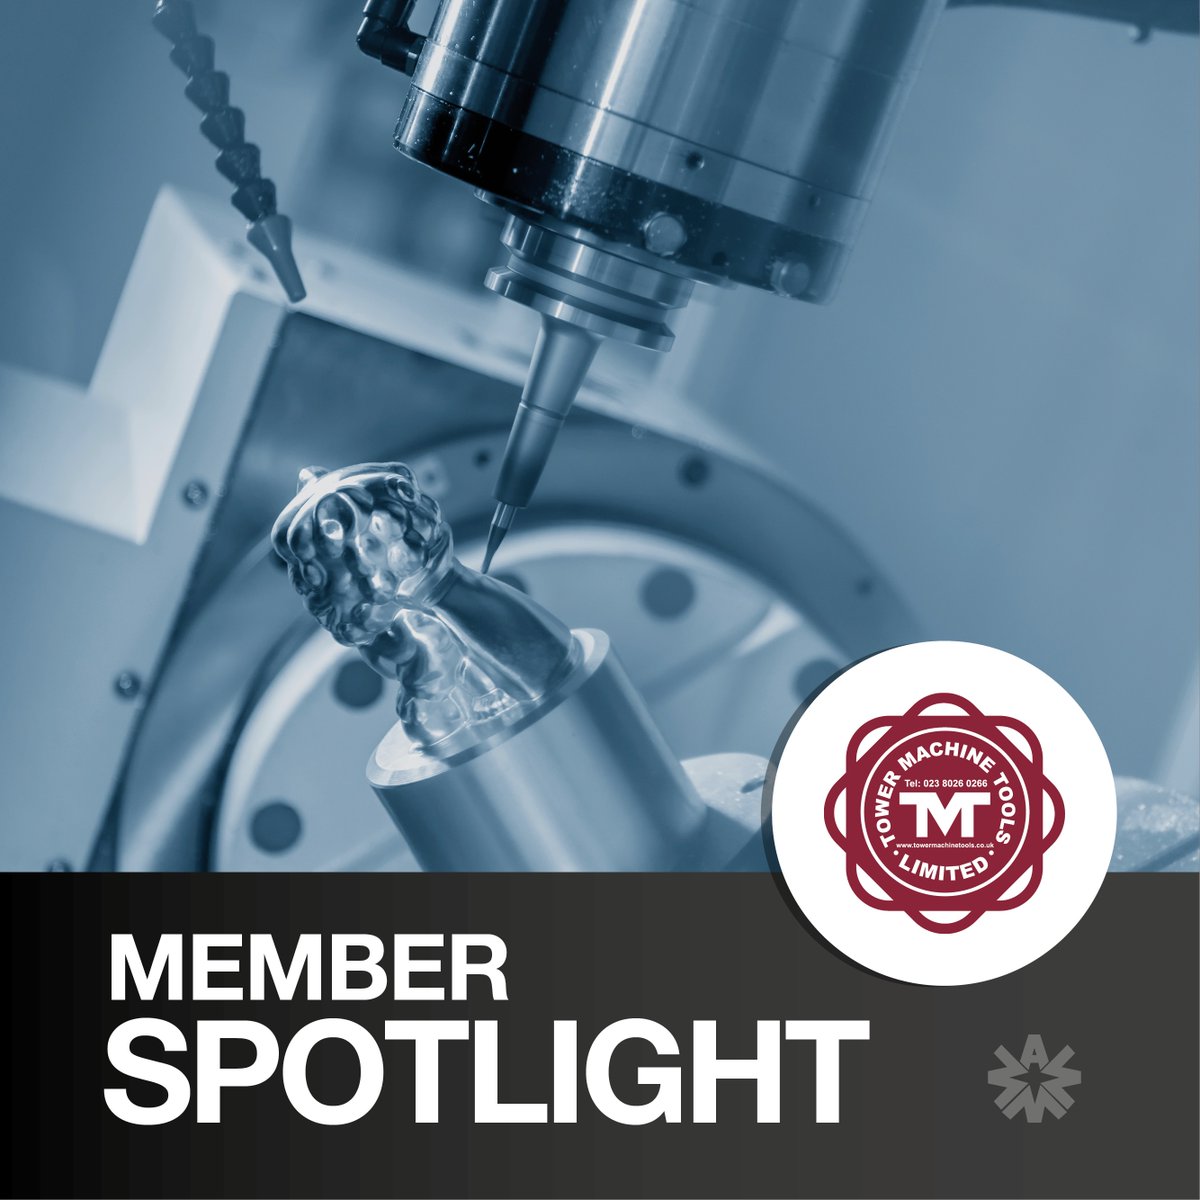 Member Spotlight ⚙️ 

Tower Machine Tools Ltd remains the only authorised dealer for Muratec Wiedemann CNC Turret Punch Presses for the UK, Eire and France.

See what they can offer your business via their member profile ➡️ bit.ly/3x3xUtO

#MMMA #ukmfg #manufacturing